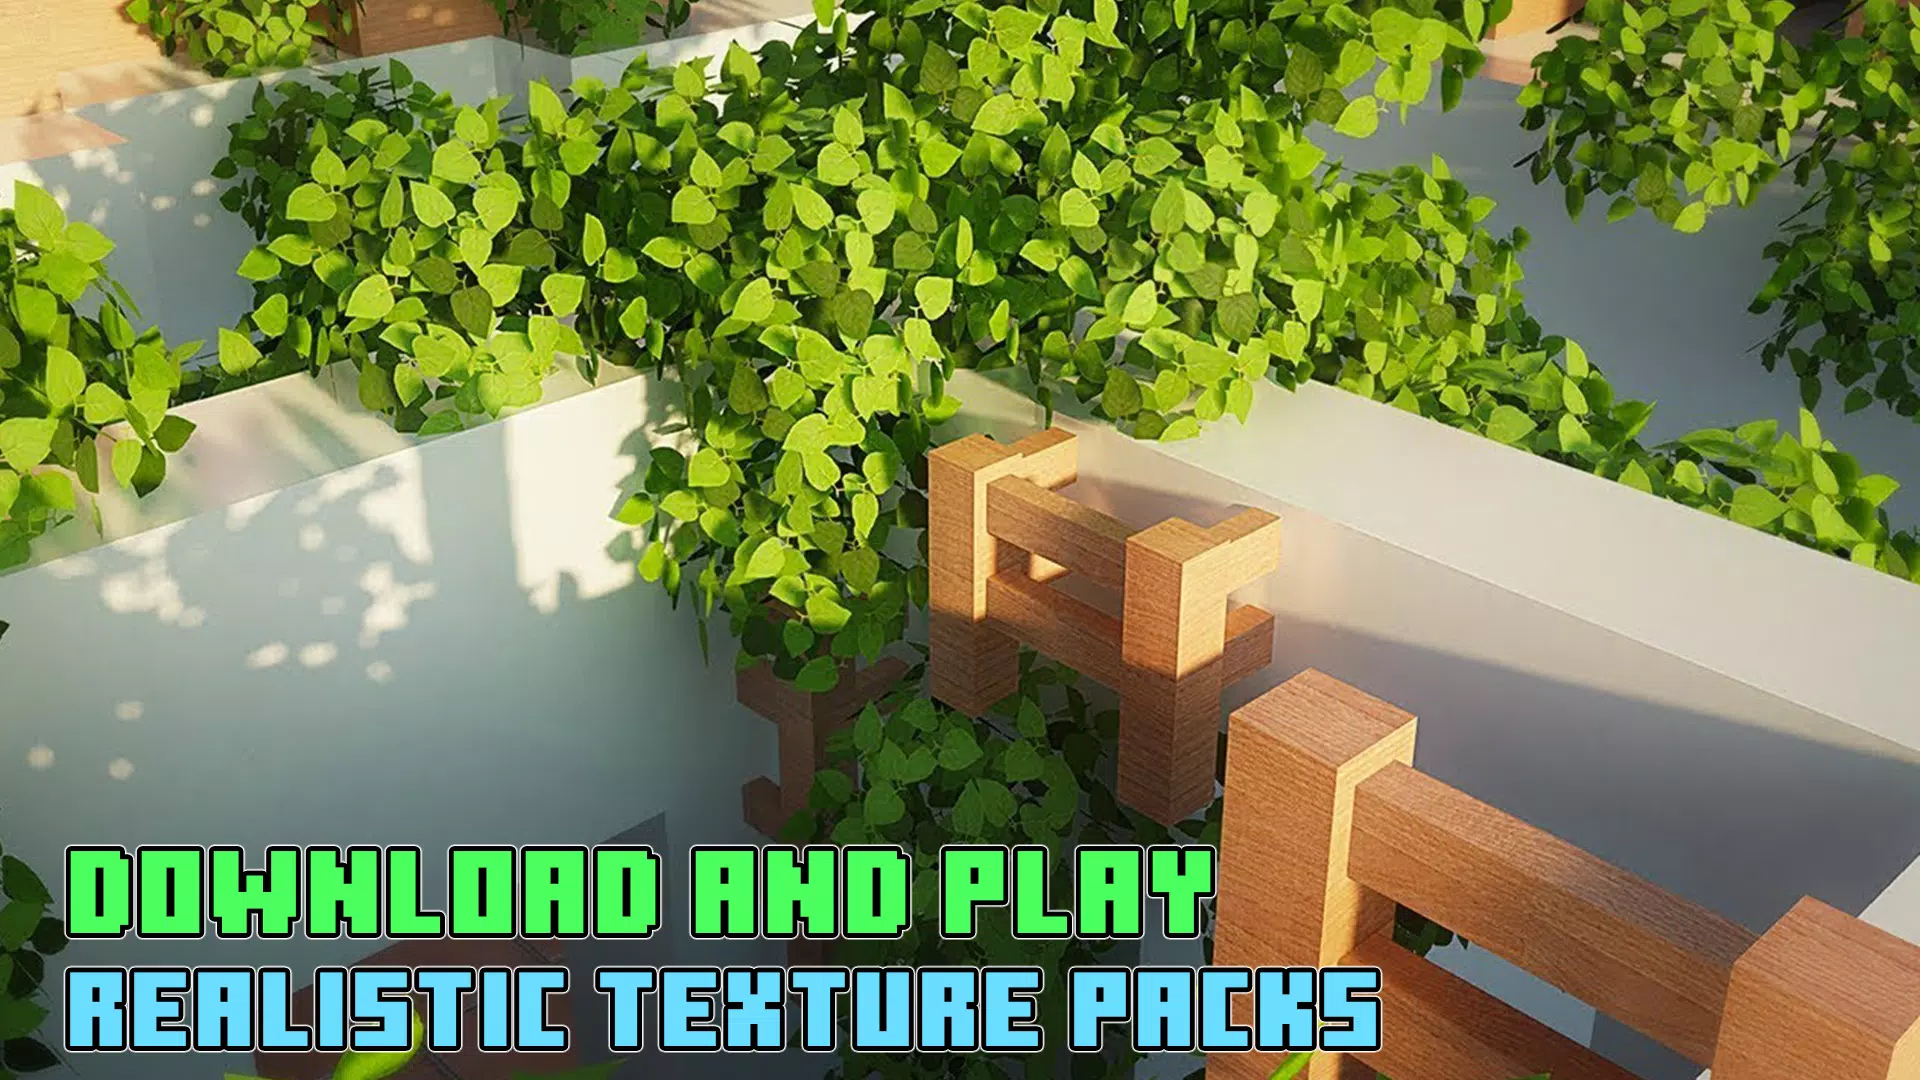 Realistic shaders for Minecraft Pocket Edition APK para Android